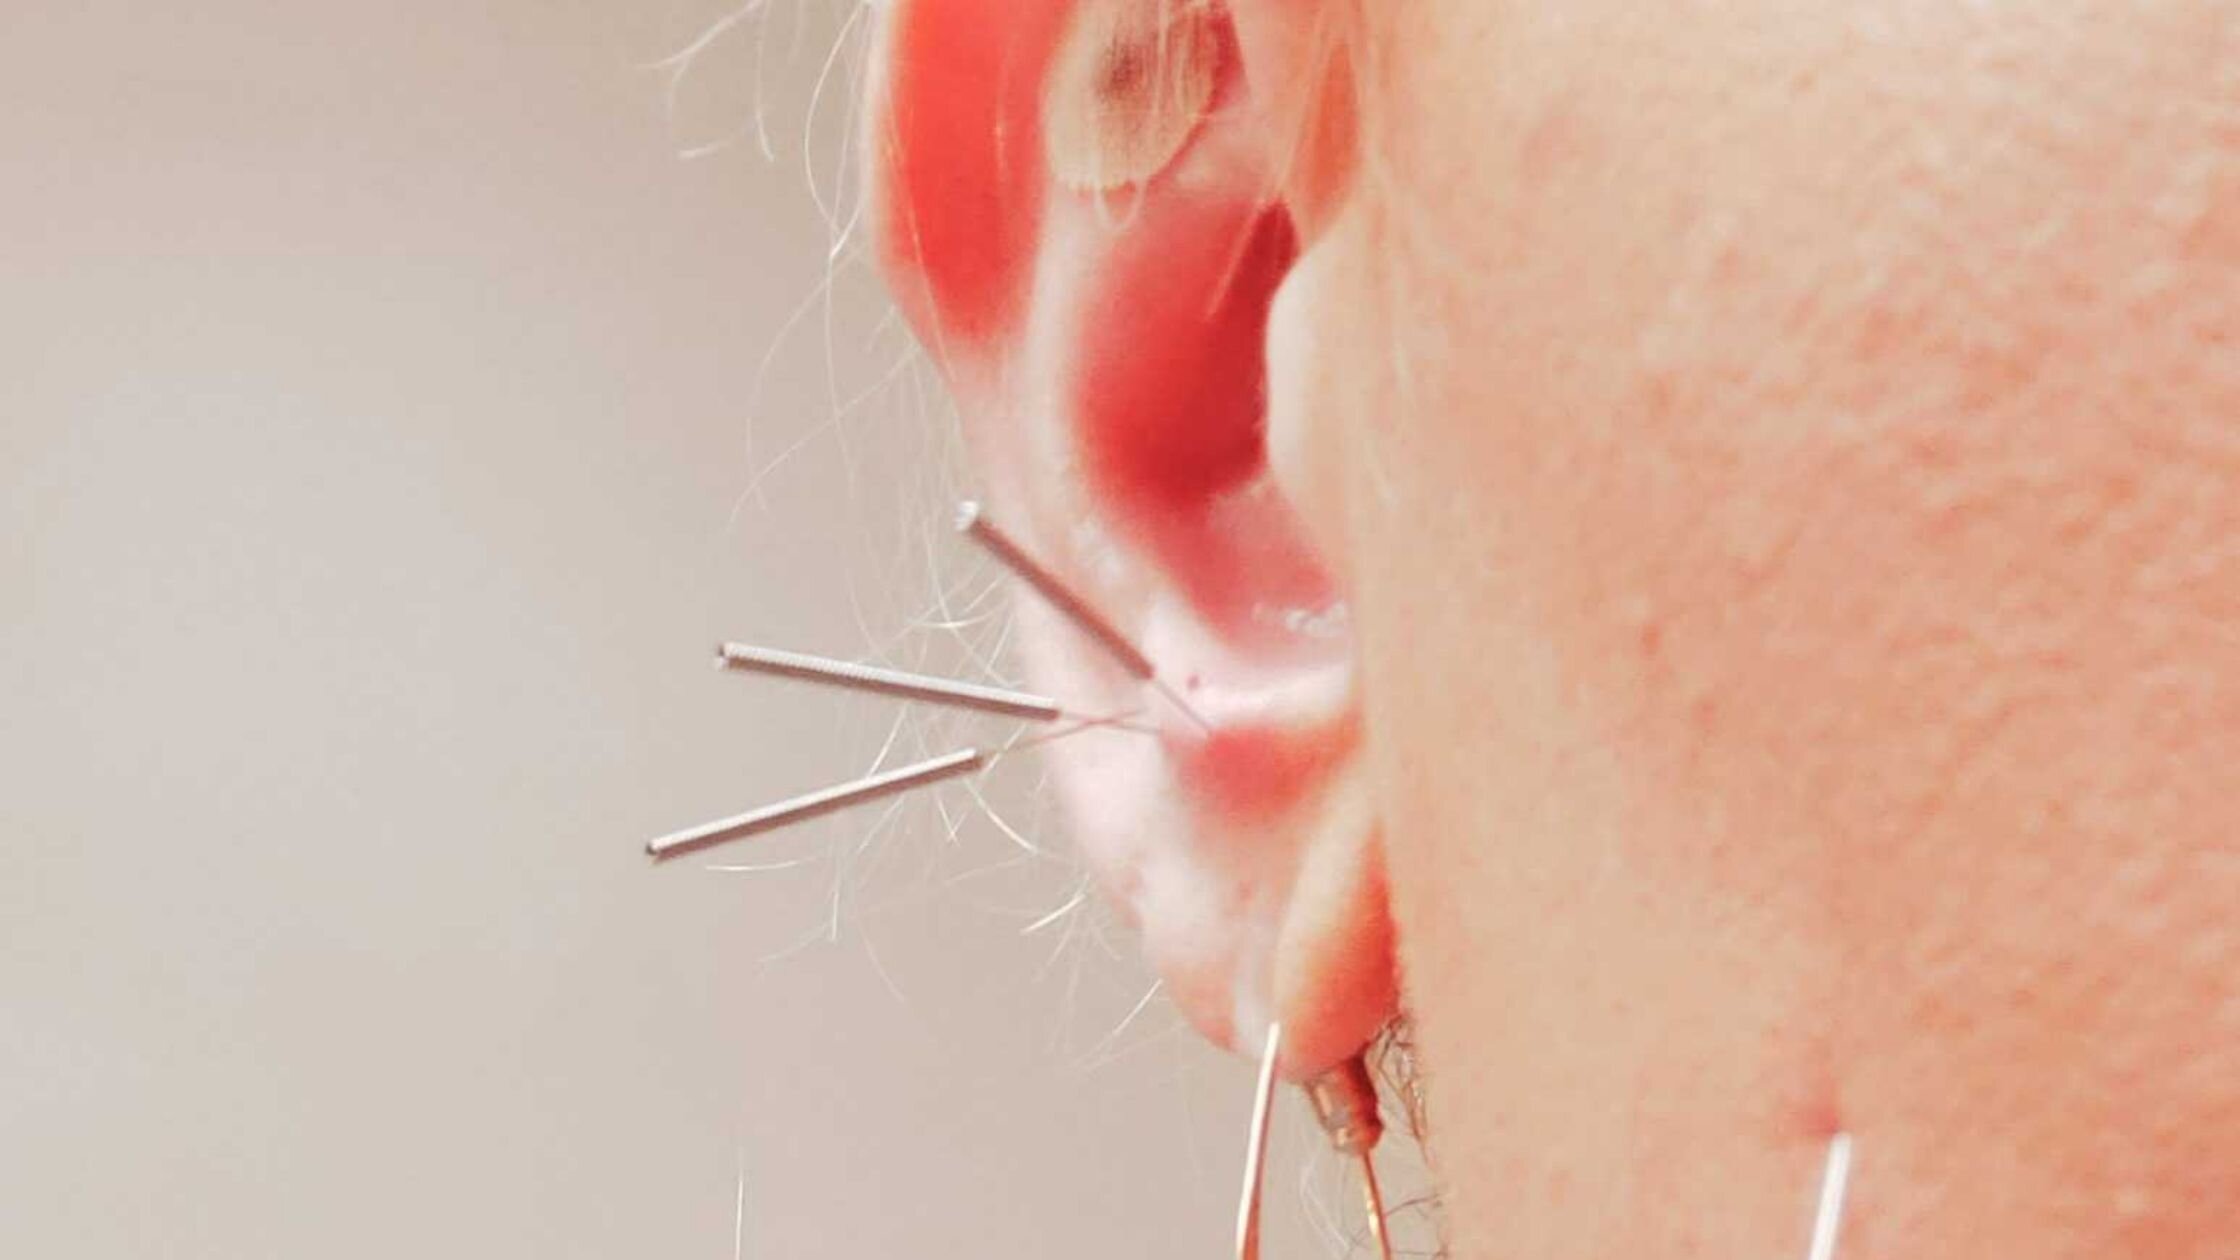 Acupuncture Treatment for Tinnitus - YouTube